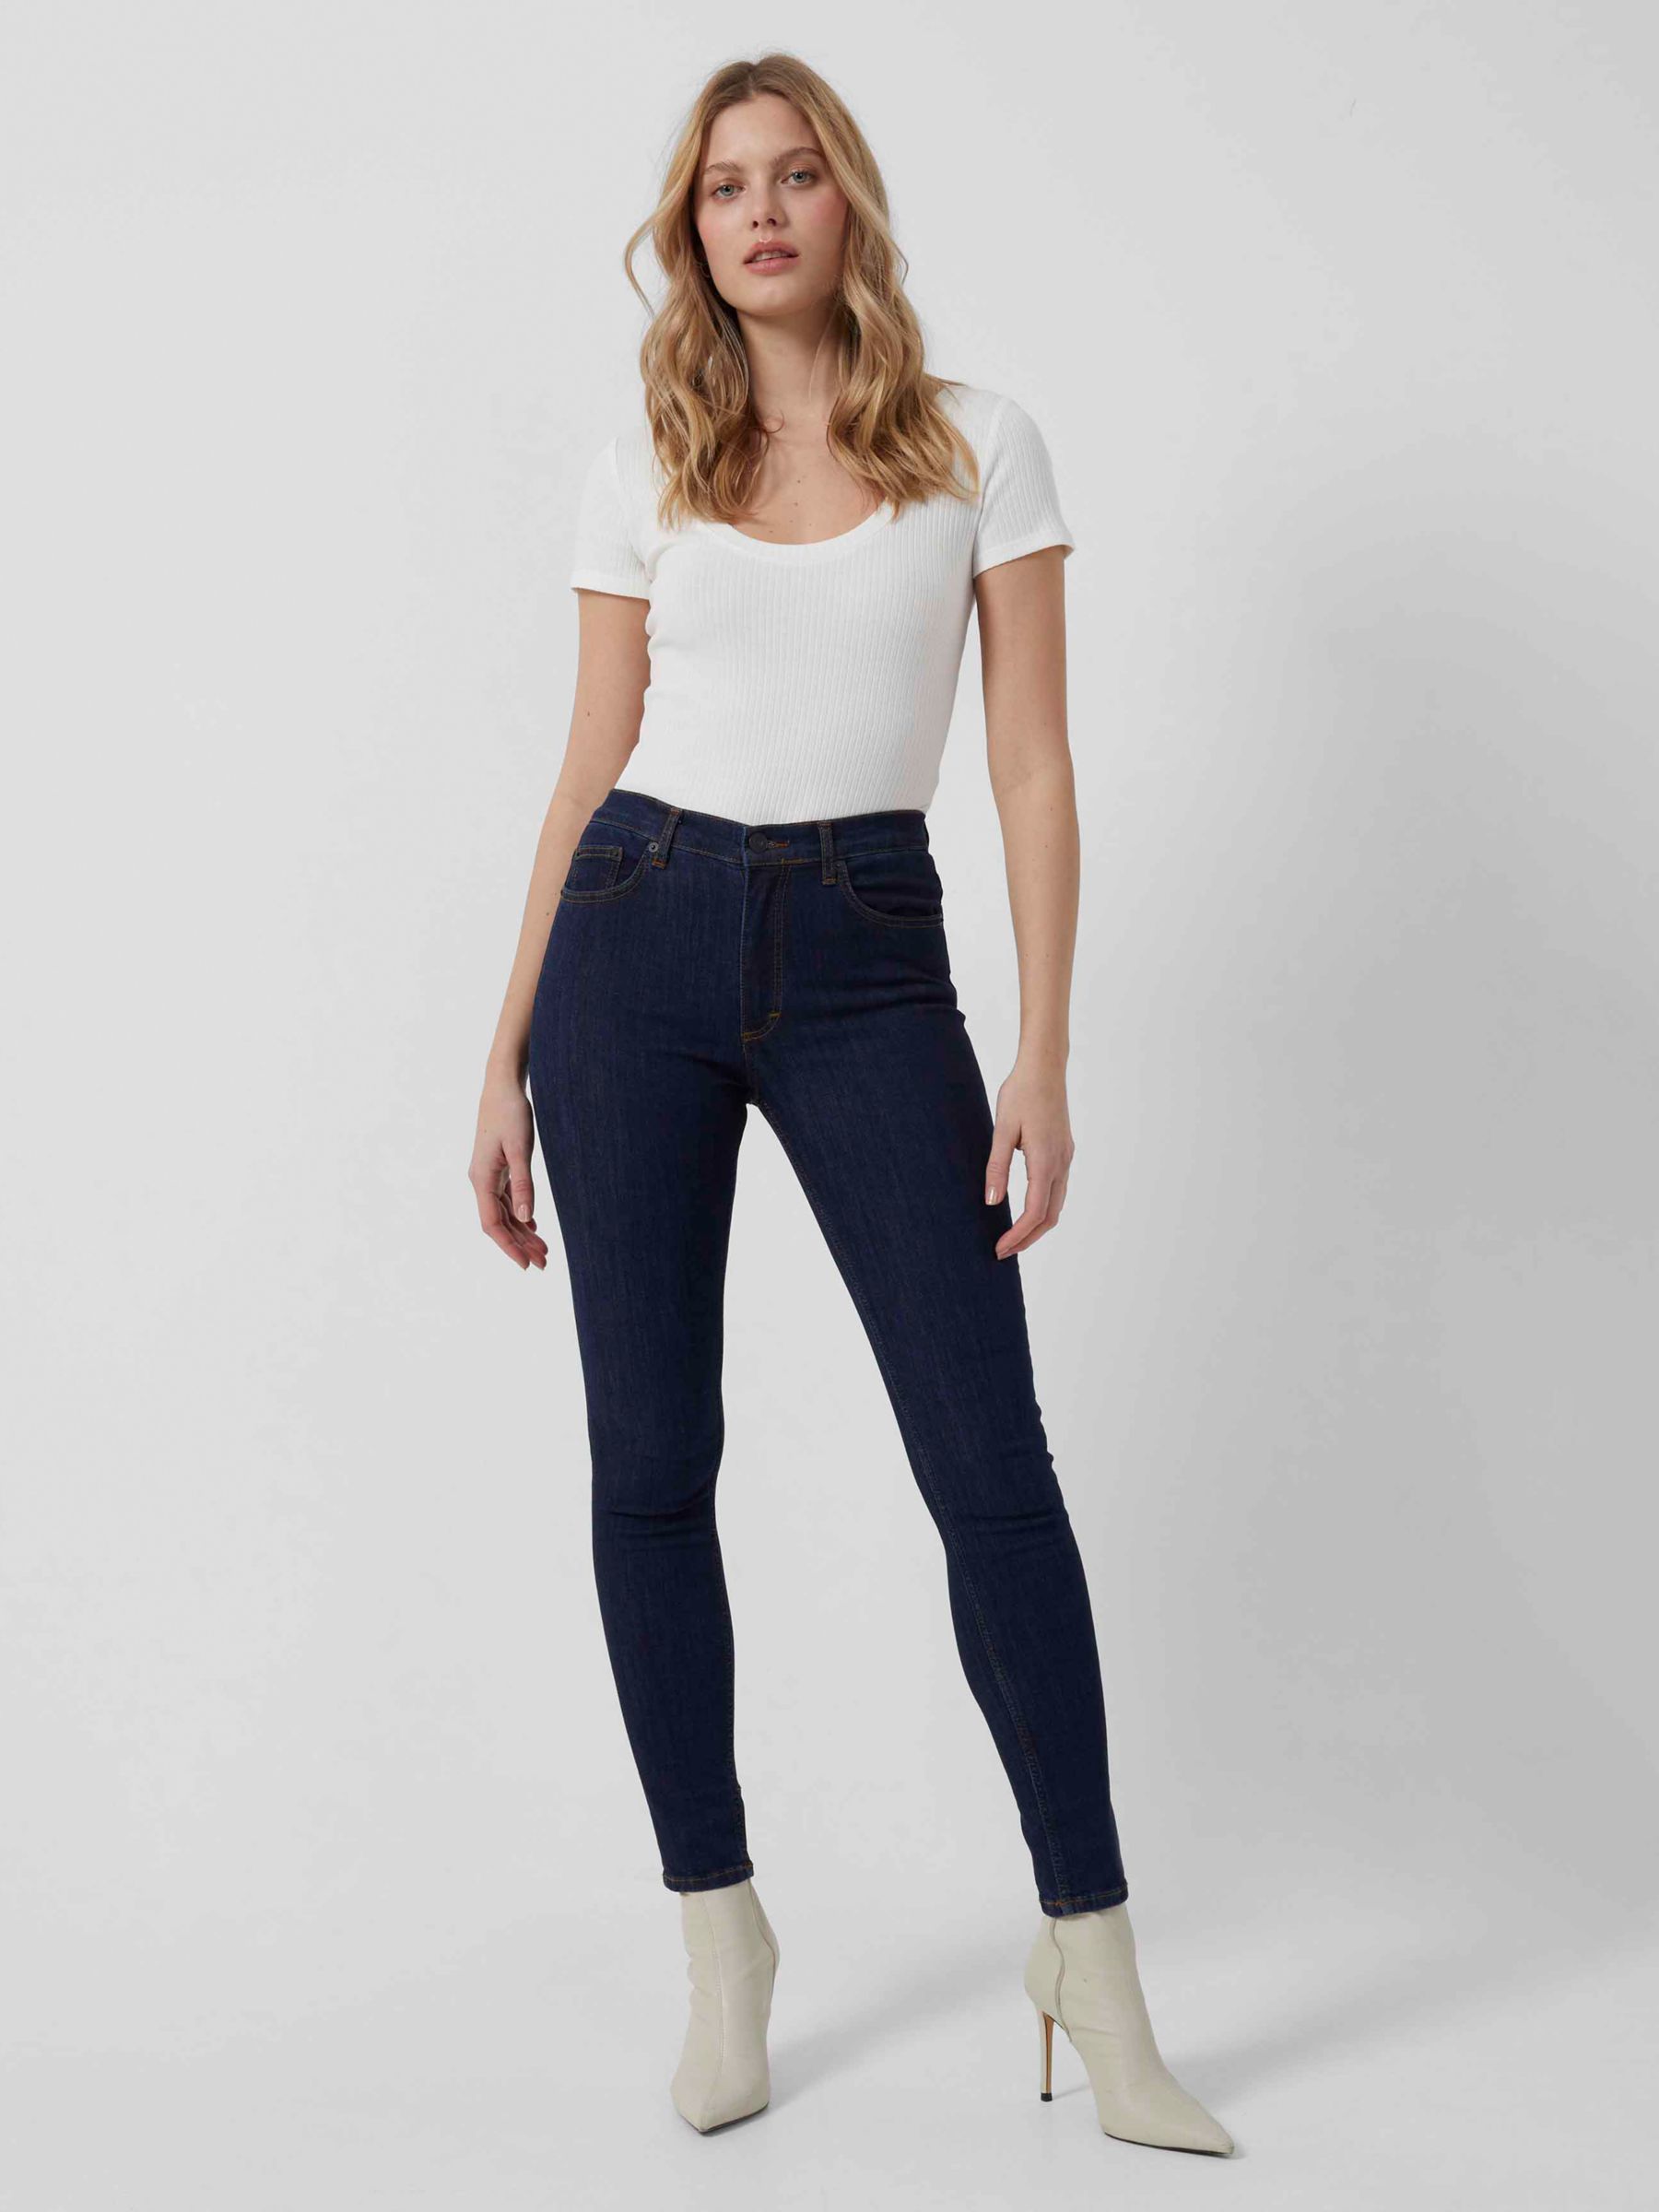 French Connection Skinny Jeans, Blue/Black, 6